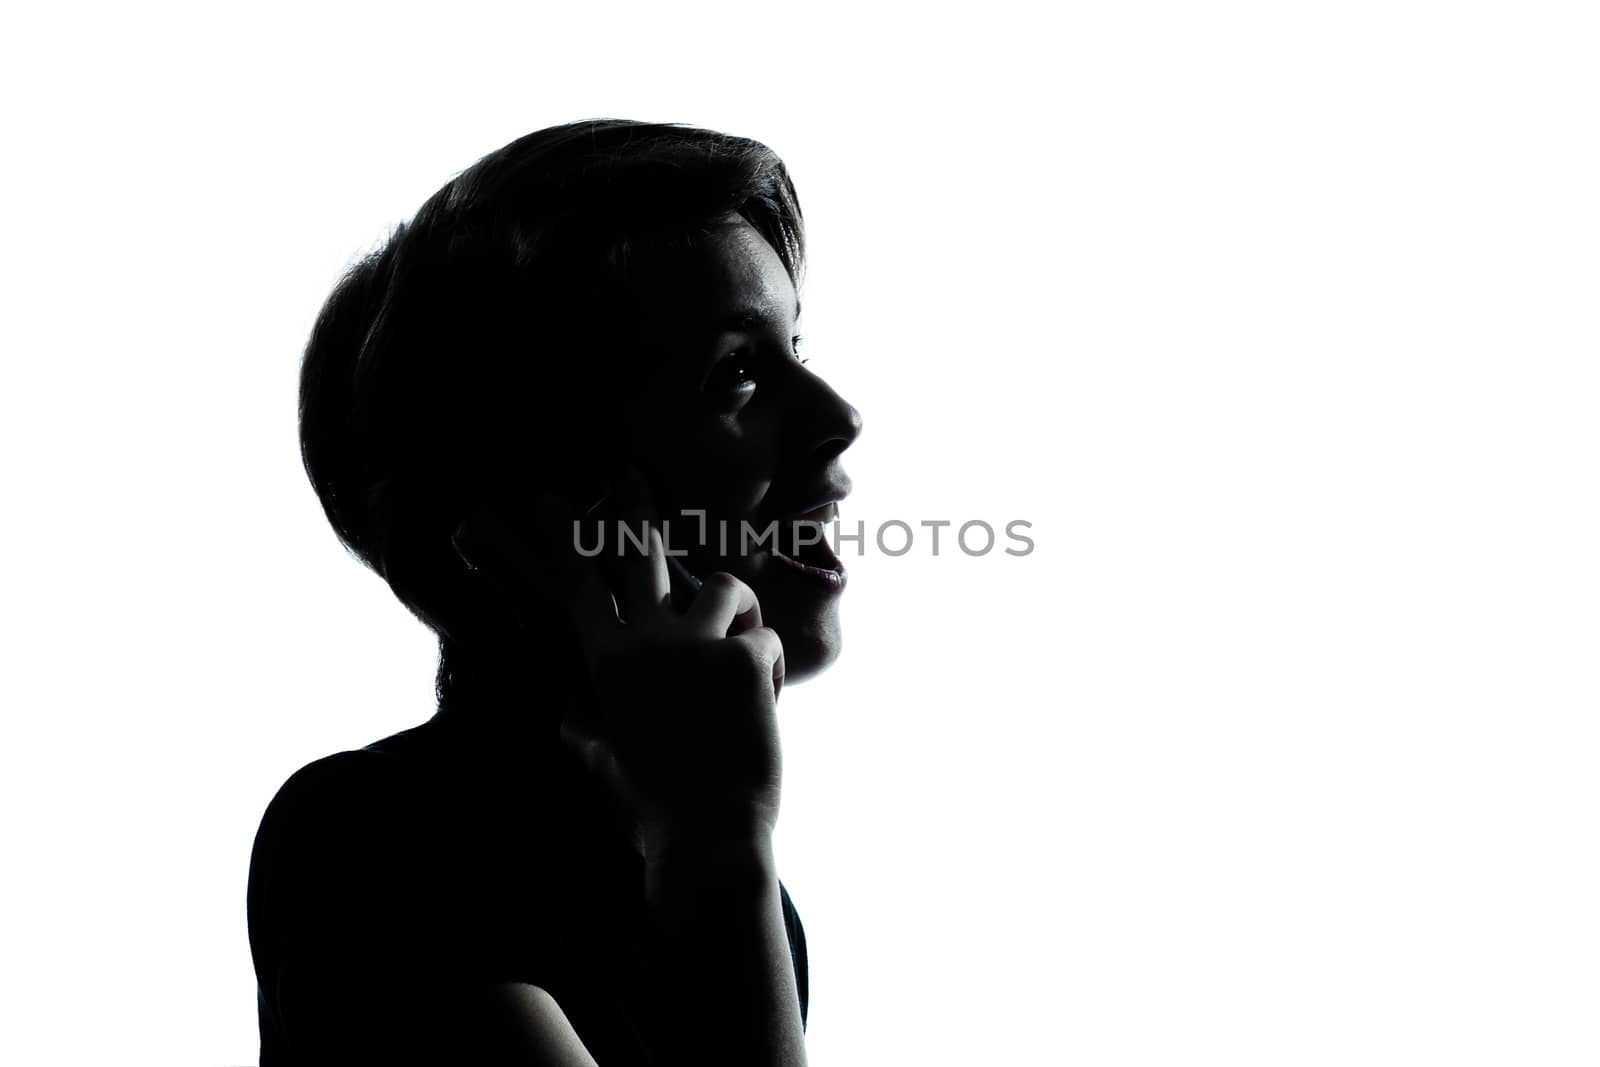 one  young teenager silhouette boy or girl on the telephone portrait in studio cut out isolated on white background